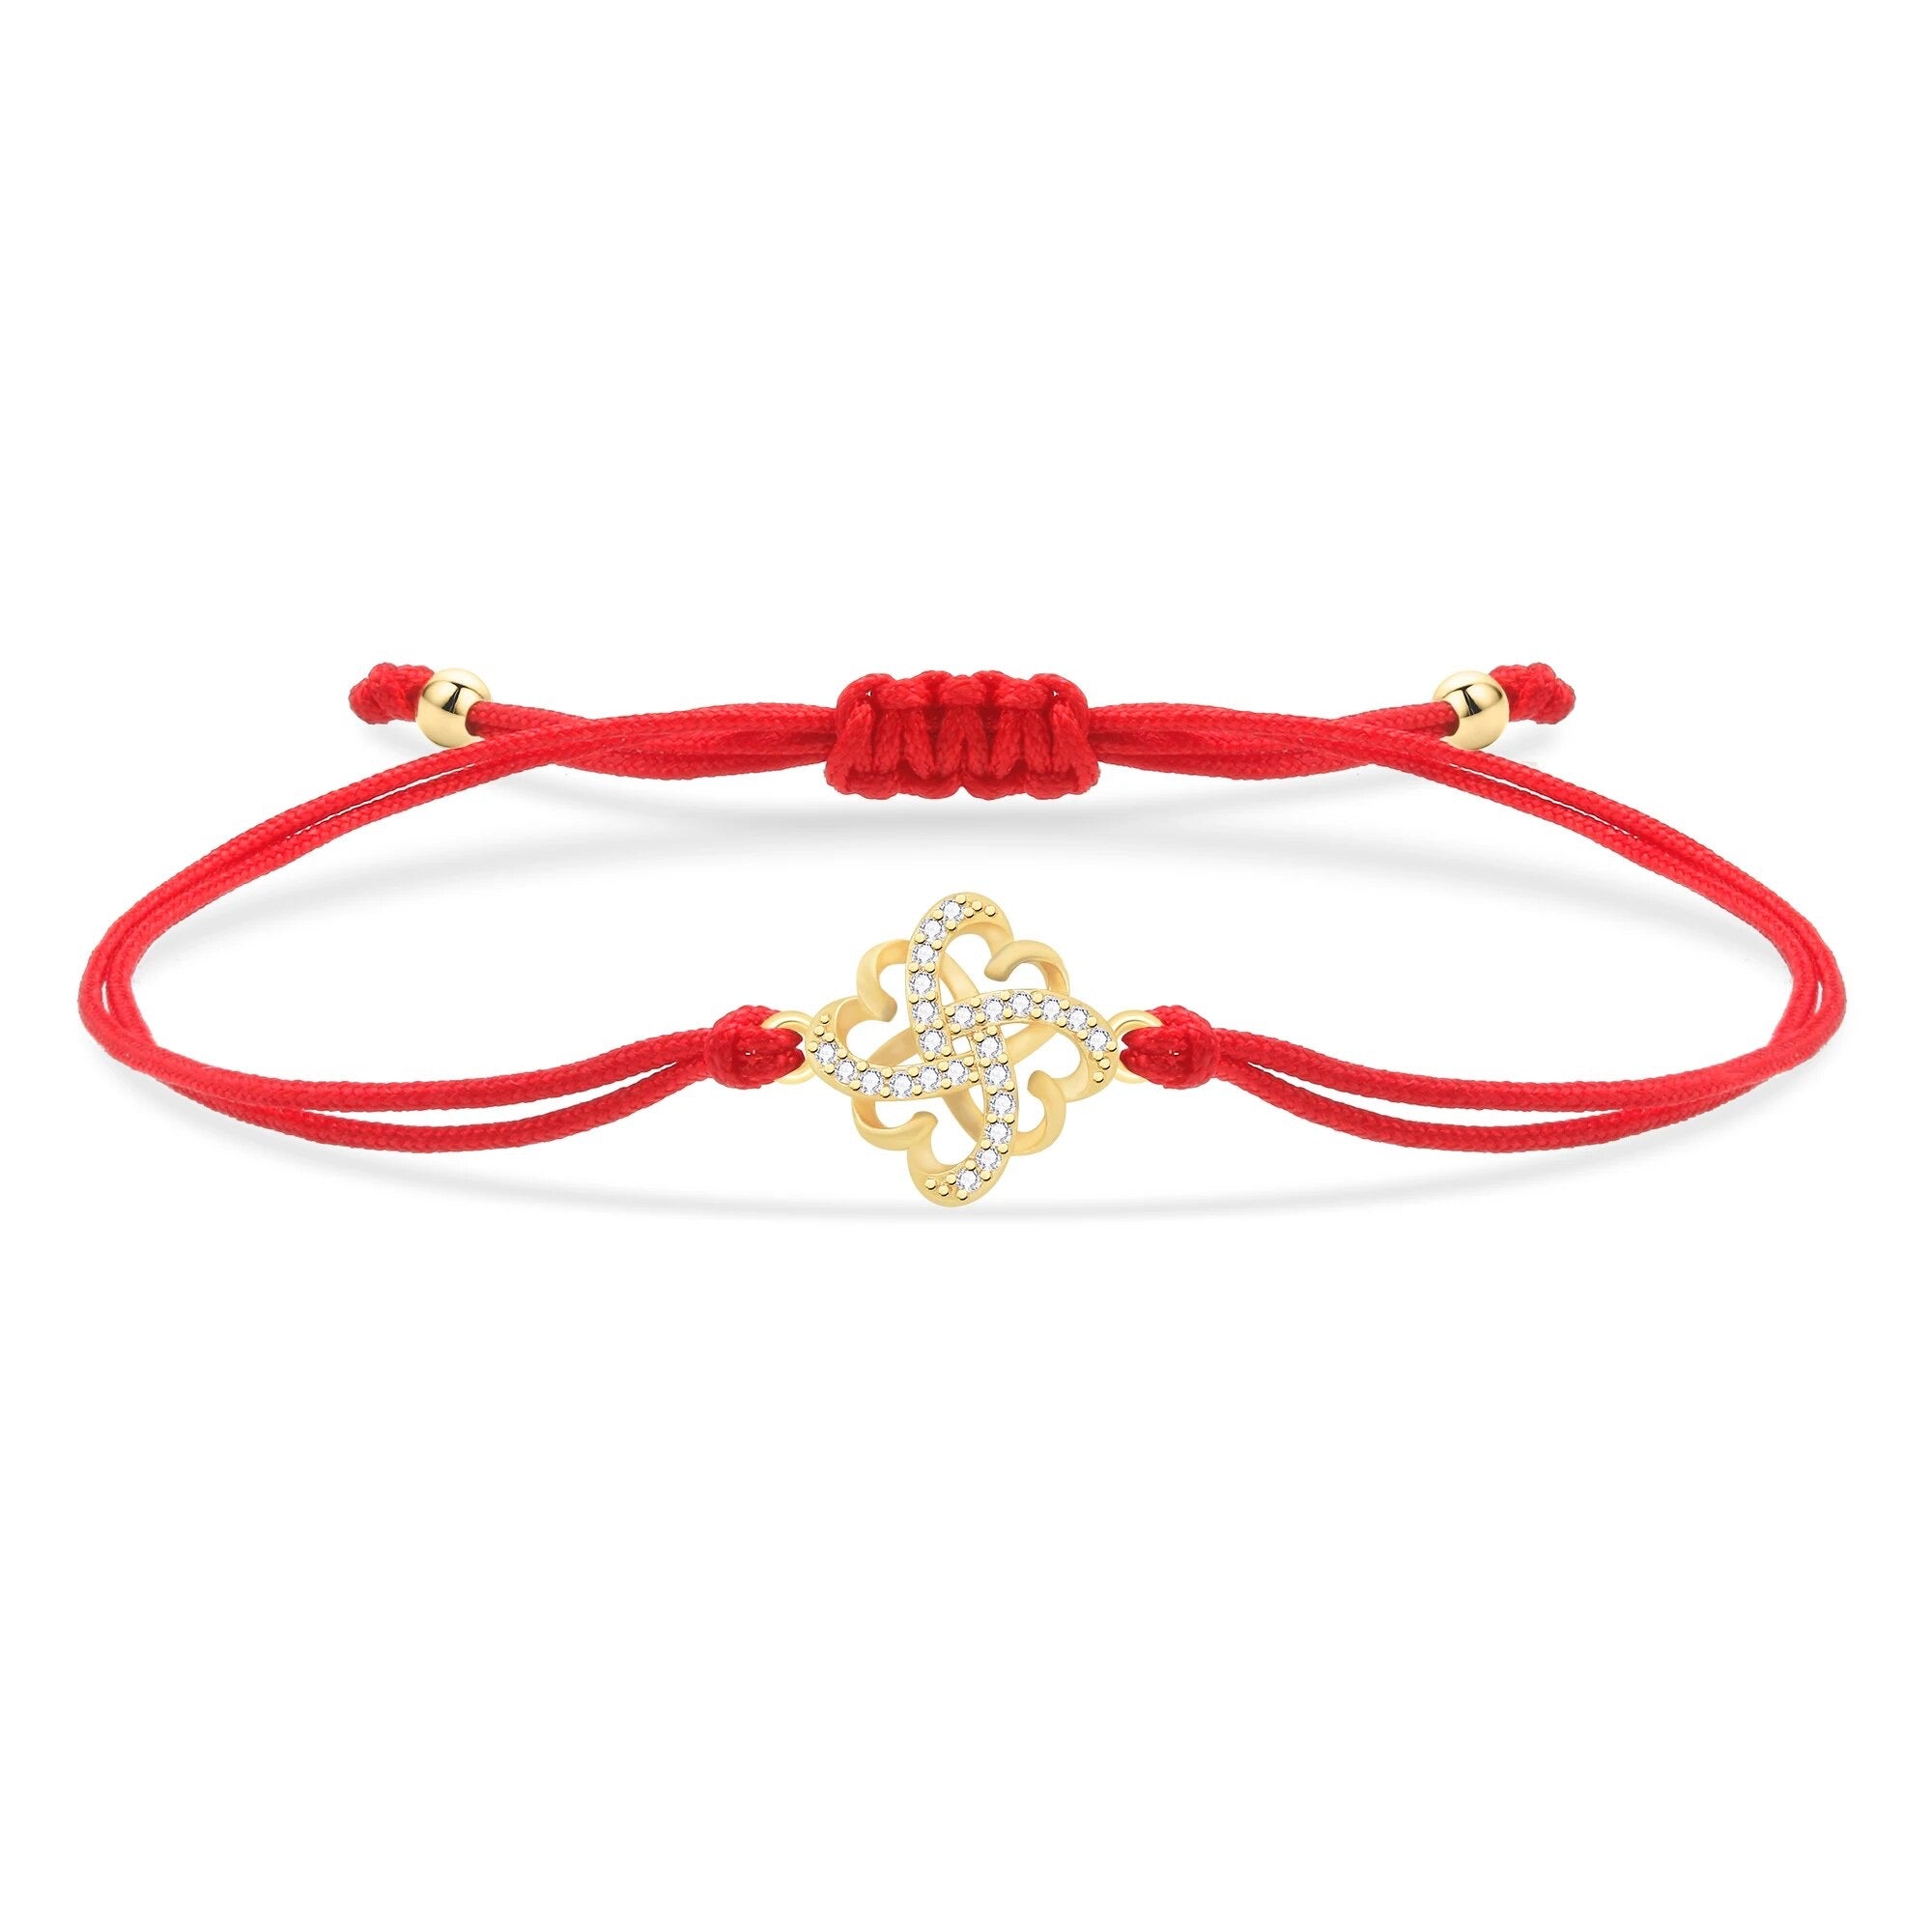 Gold Hearts Charm Red String Protection Bracelet - My Harmony Tree